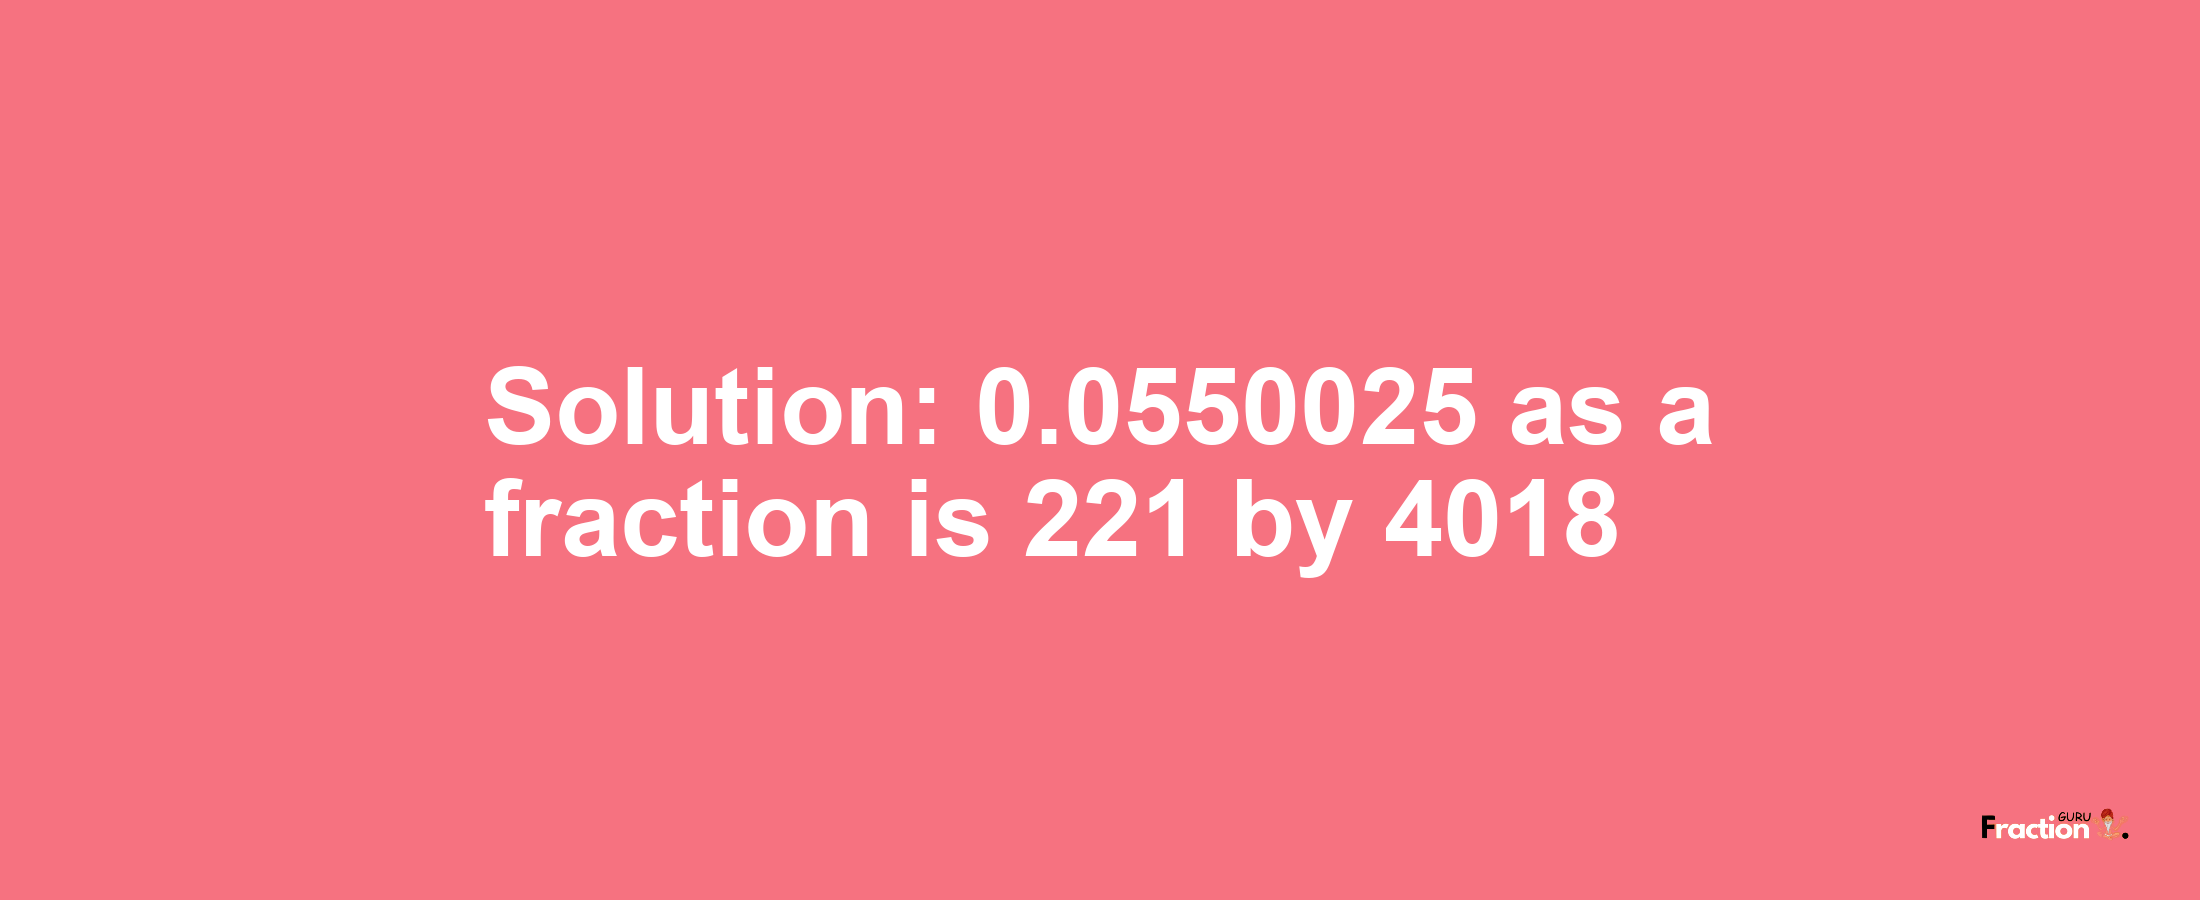 Solution:0.0550025 as a fraction is 221/4018